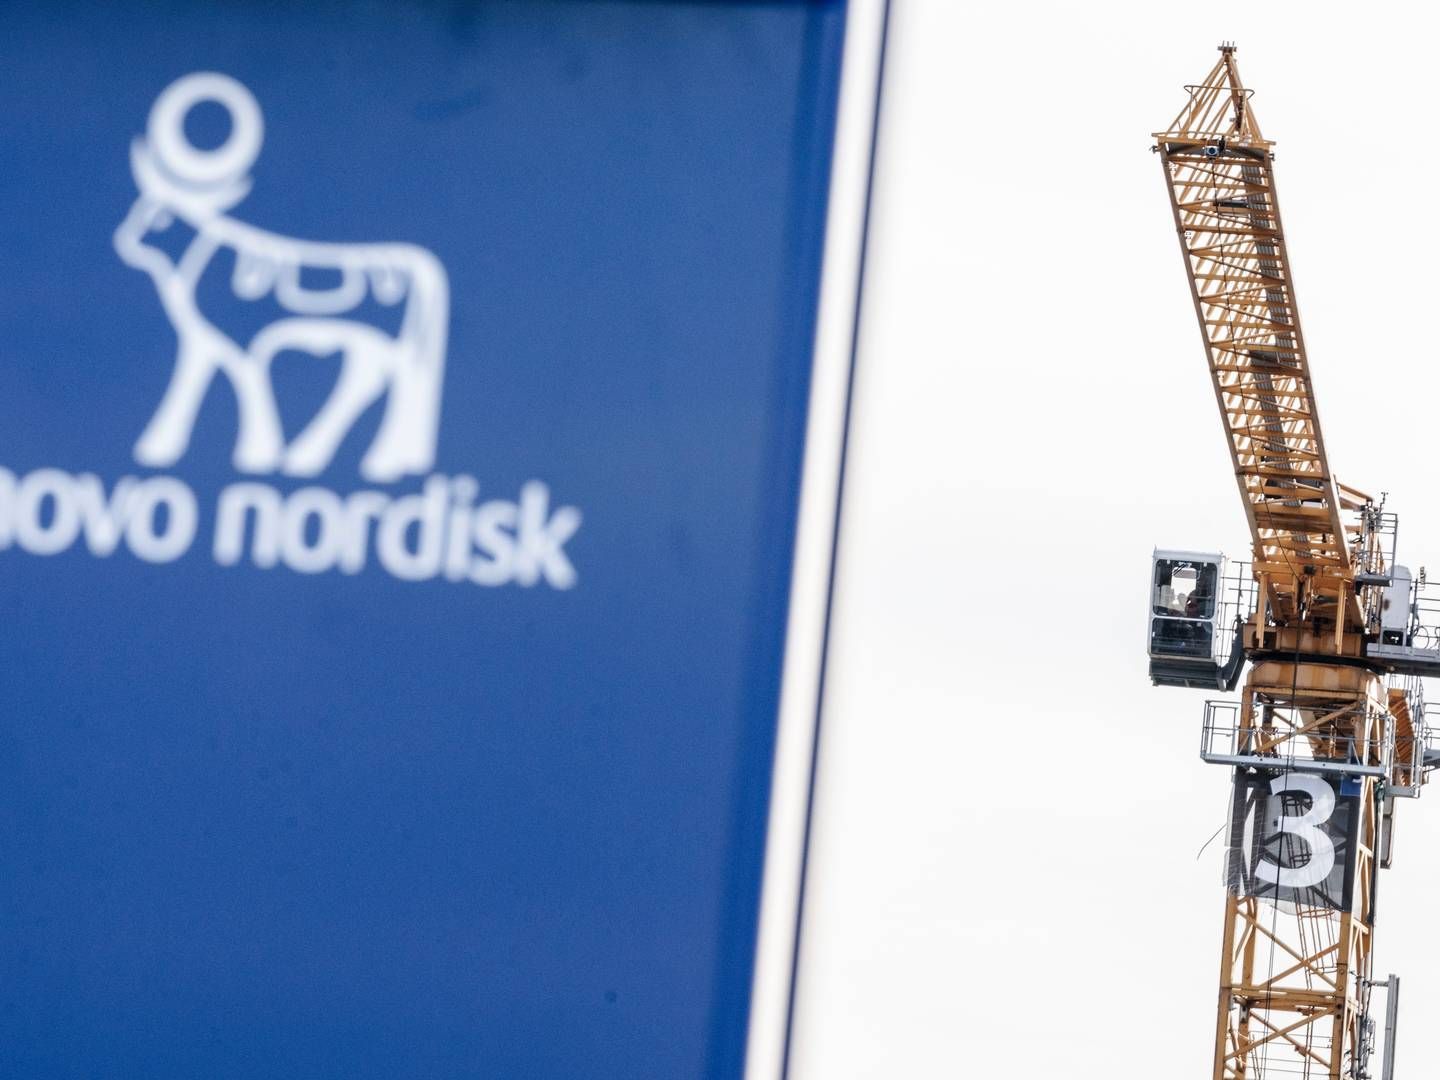 Novo Nordisk is constructing new factories and expanding existing ones in multiple countries. | Photo: Thomas Traasdahl